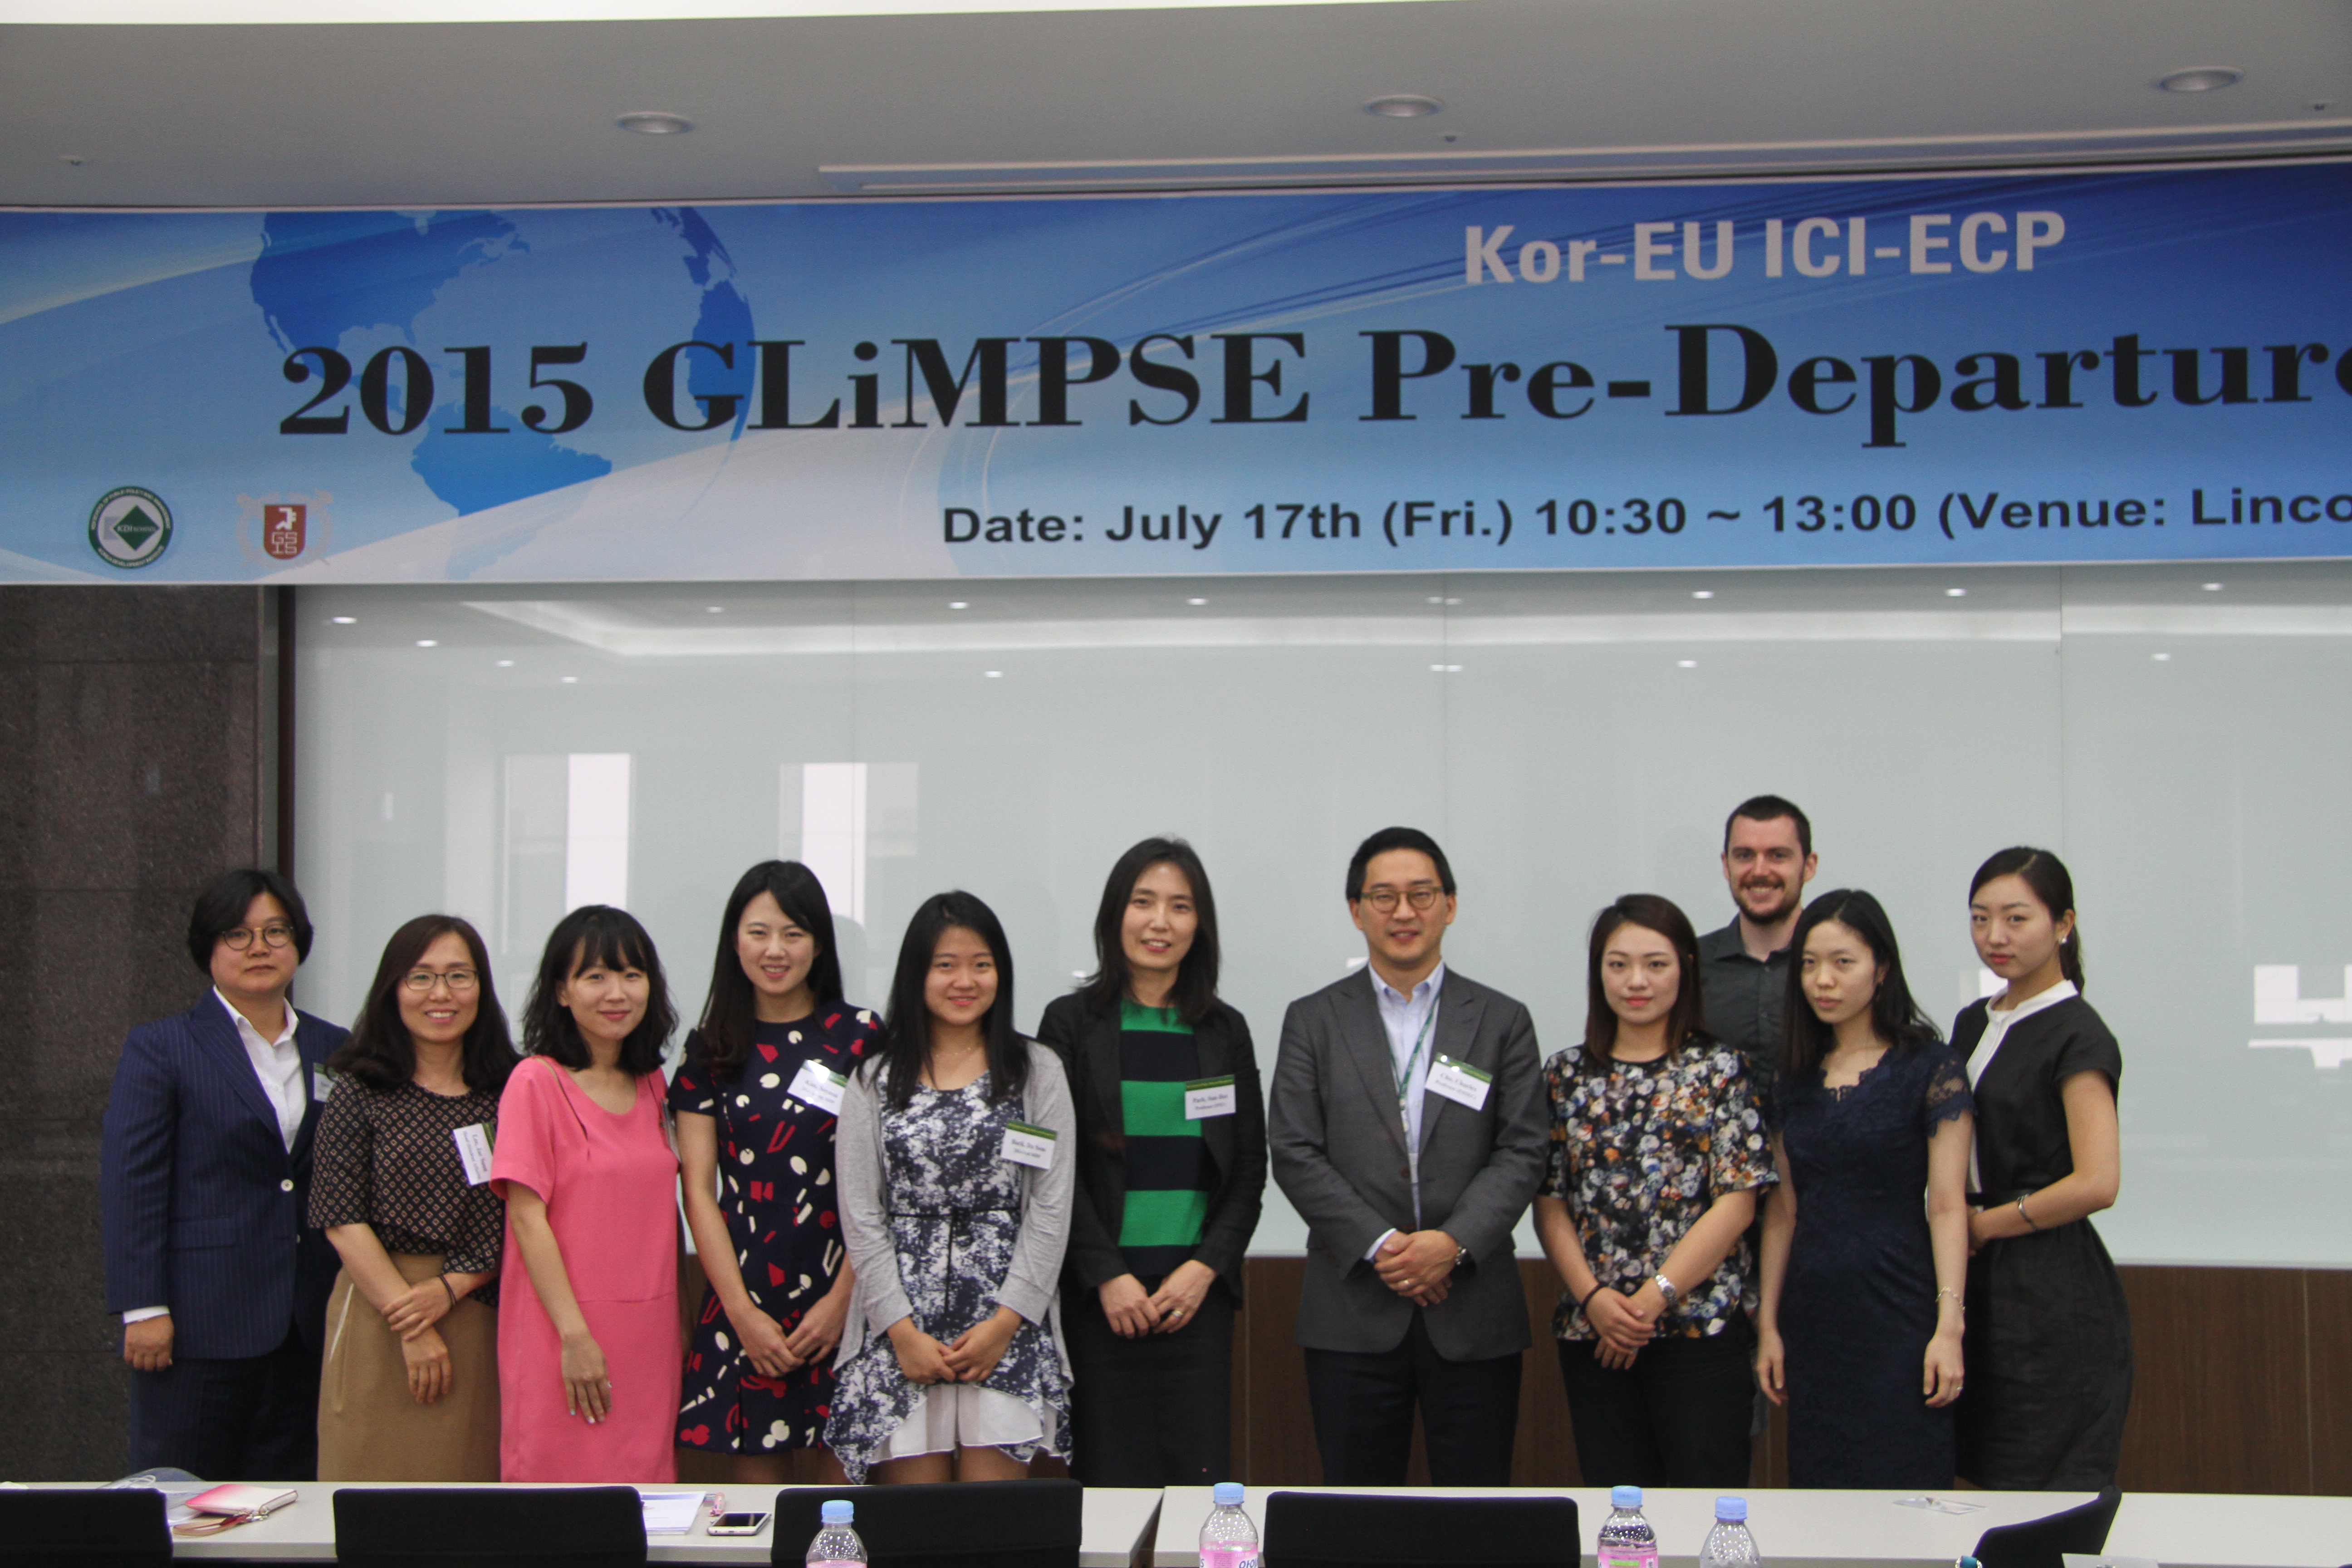 GLiMPSE program orientation and special lecture by Prof. Charles Cho